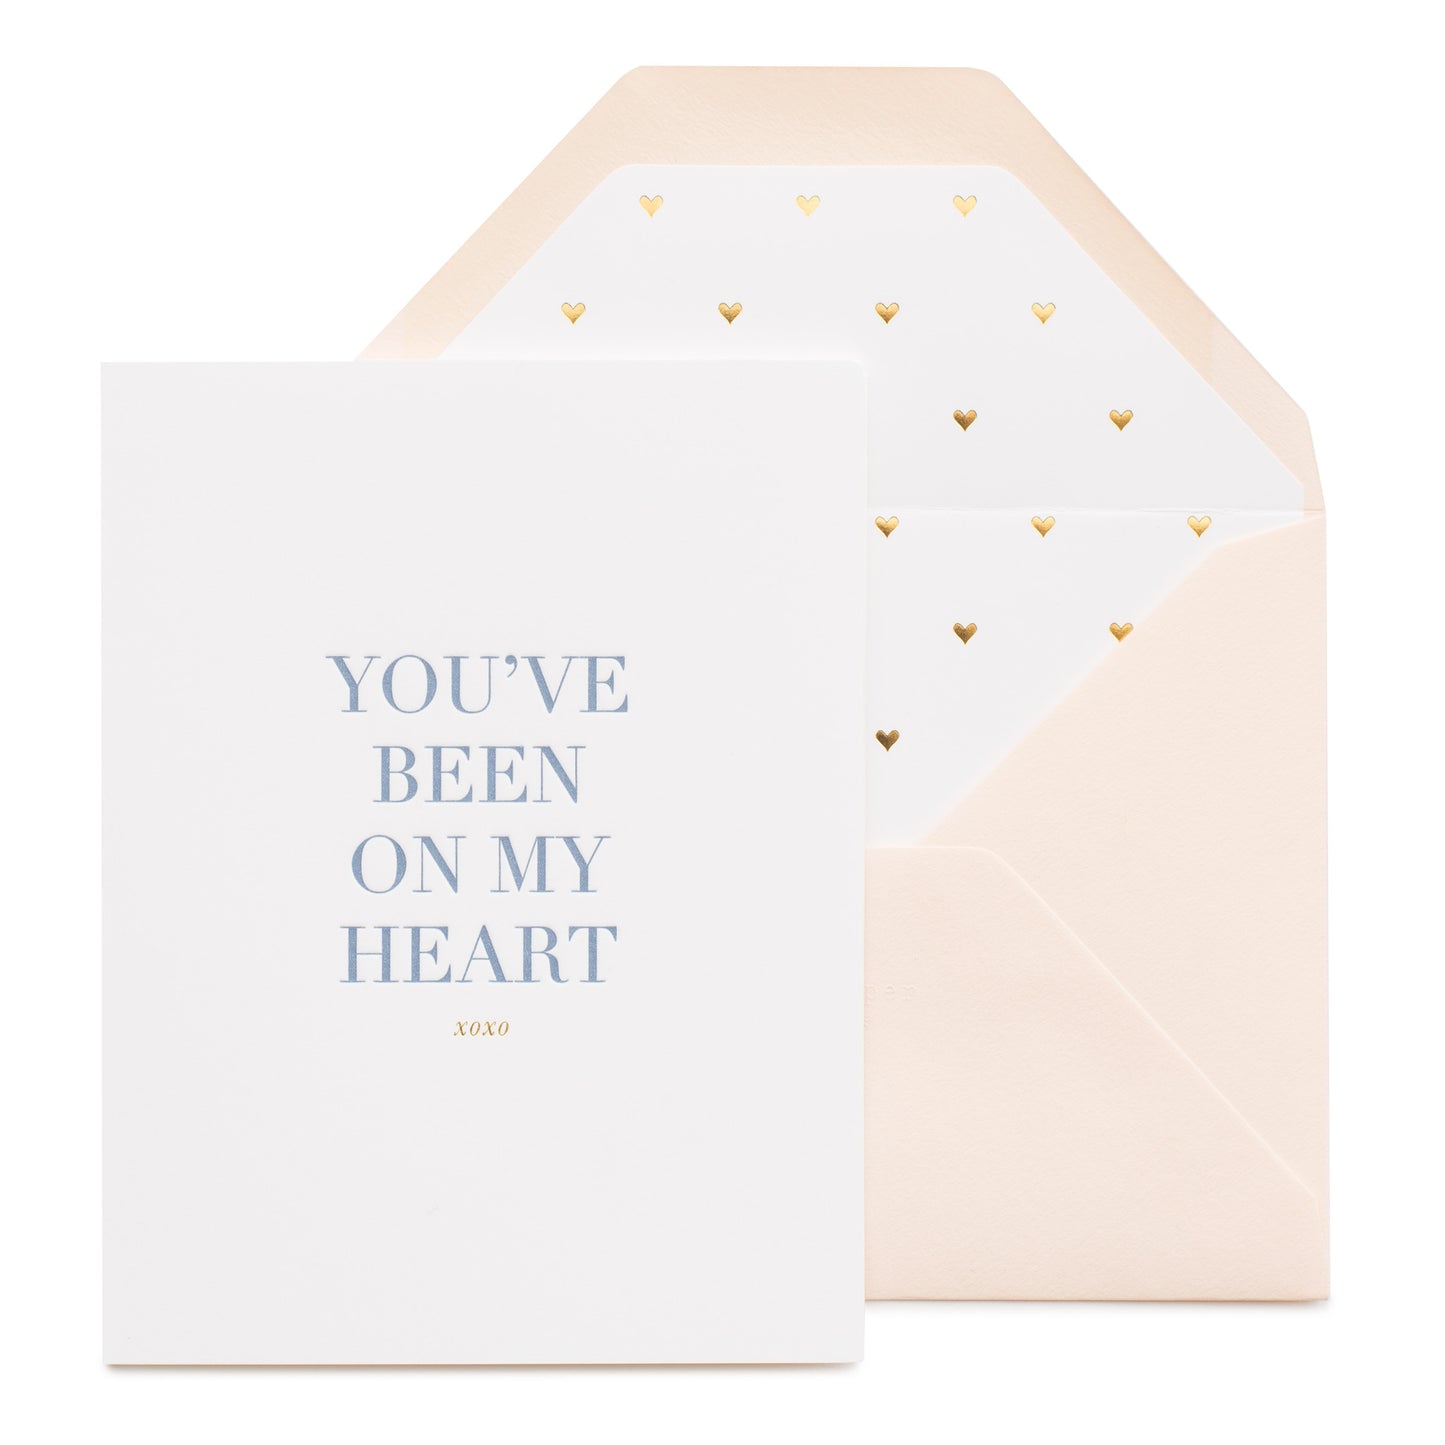 White card printed with blue ink you've been on my heart with a gold heart lined pink envelope